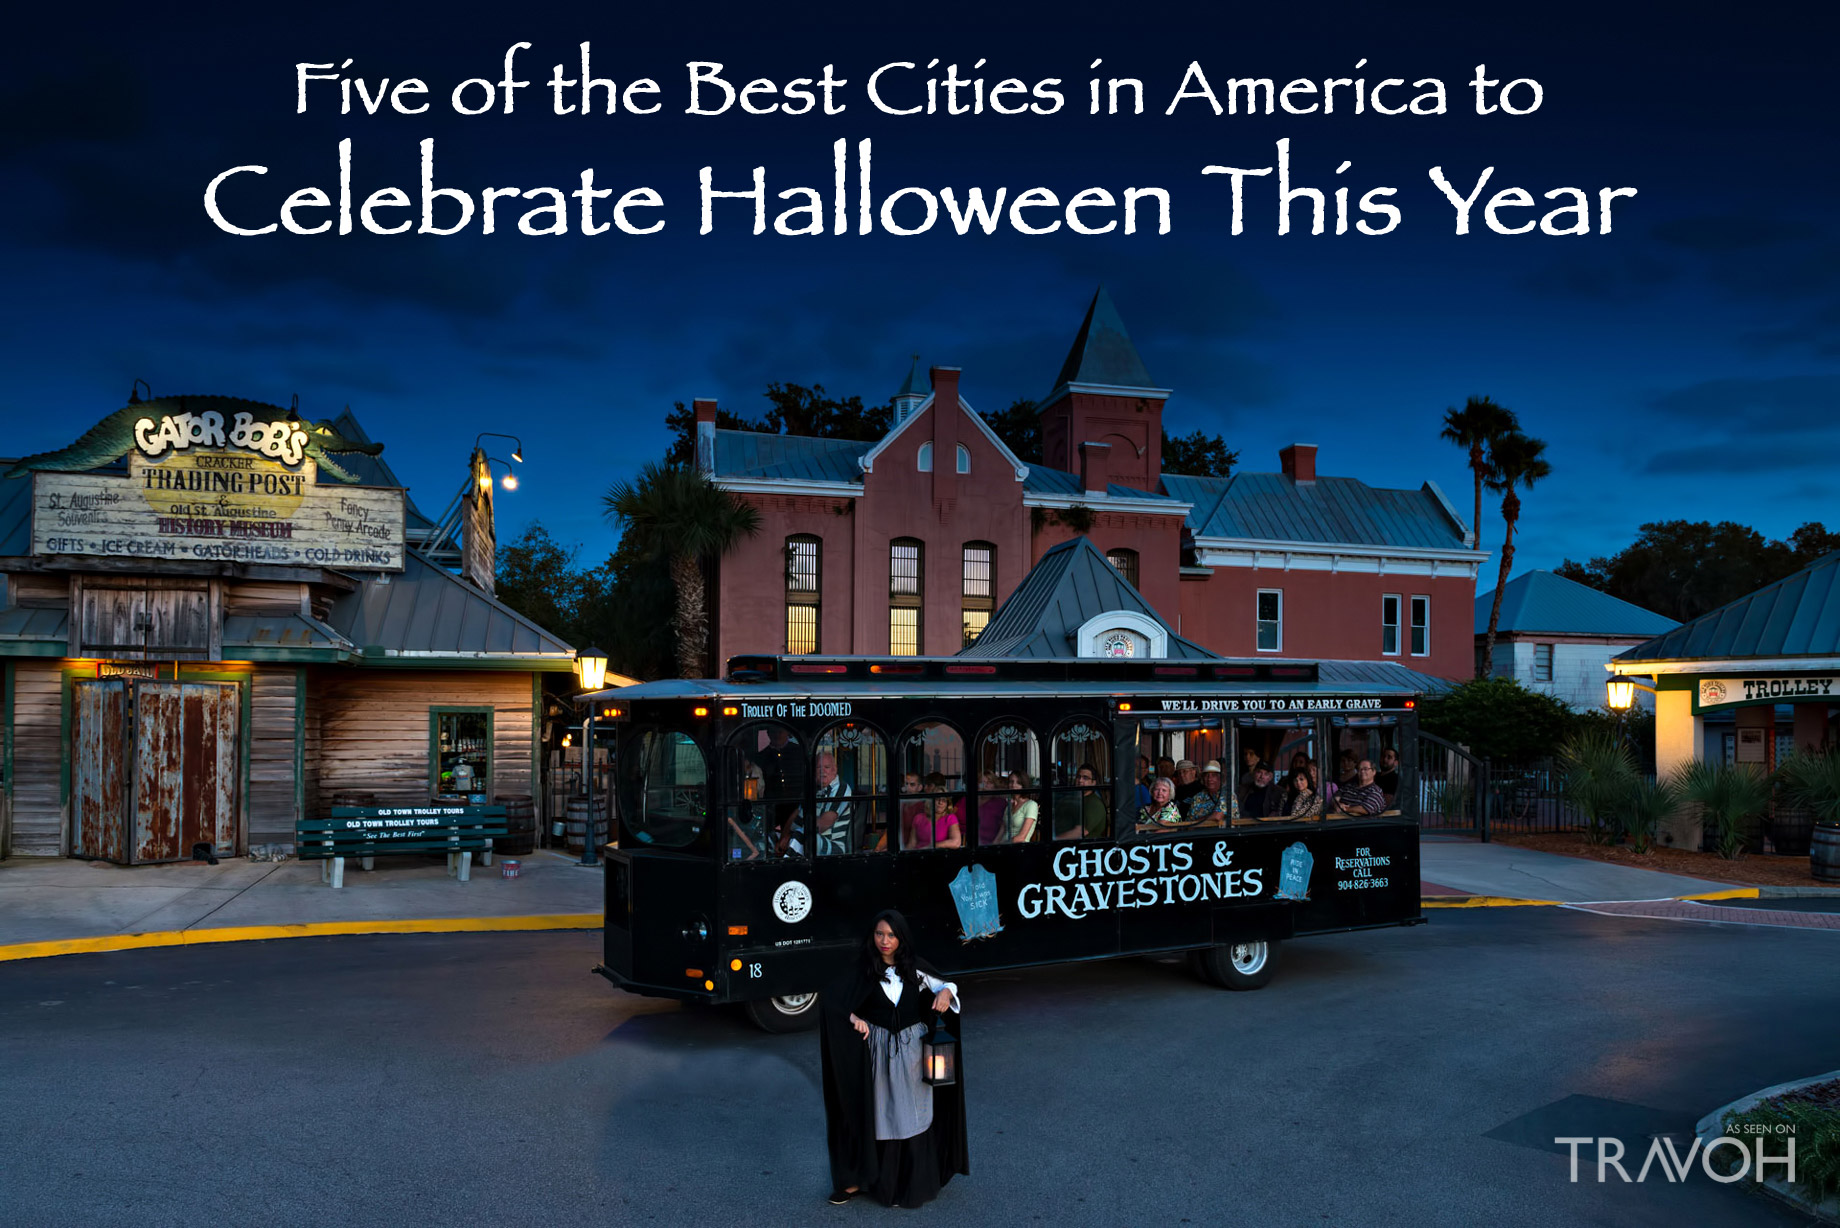 Five of the Best Cities in America to Celebrate Halloween This Year